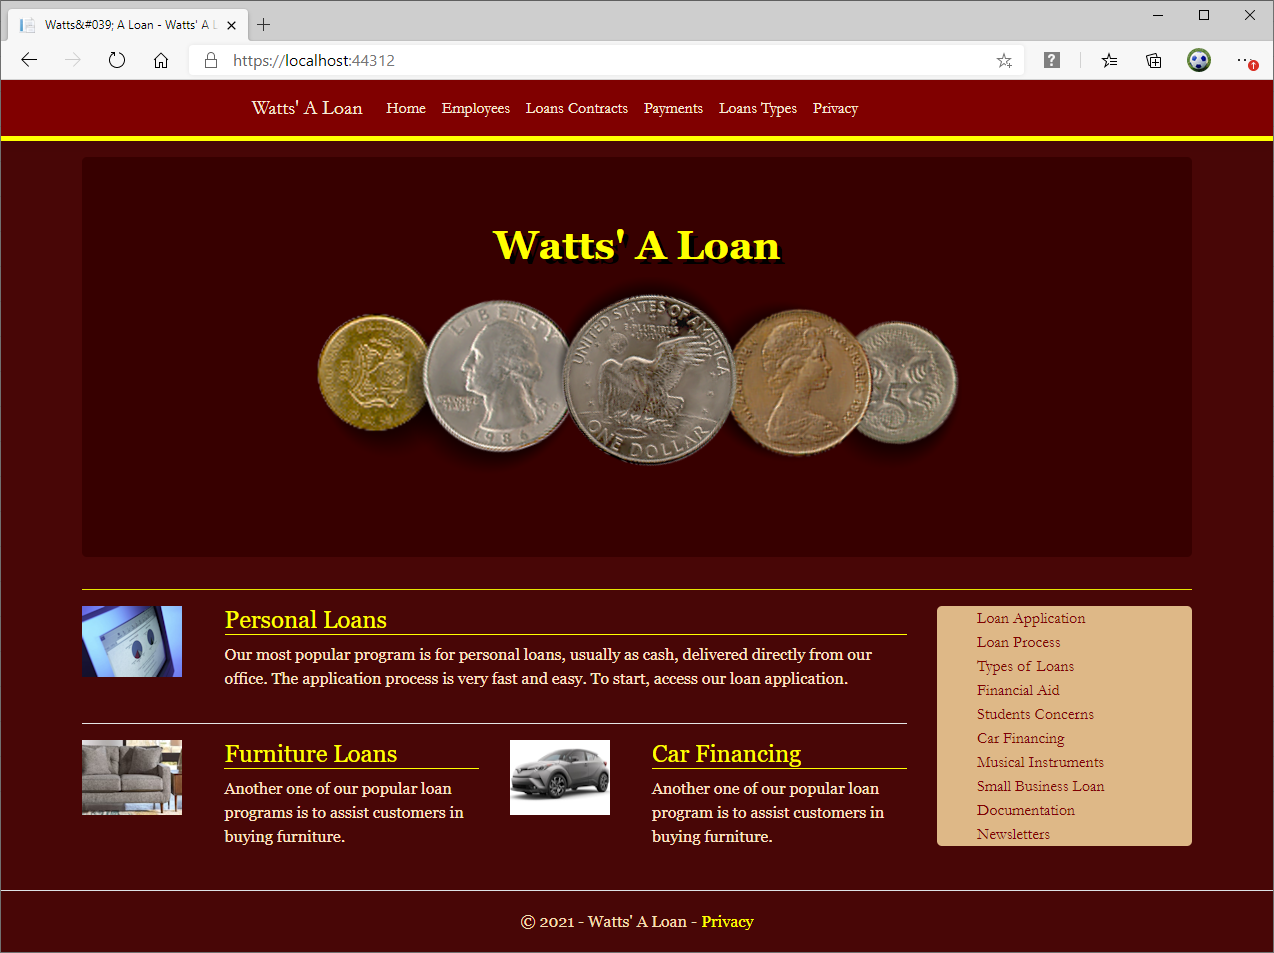 Watts's A Loan - Home Page